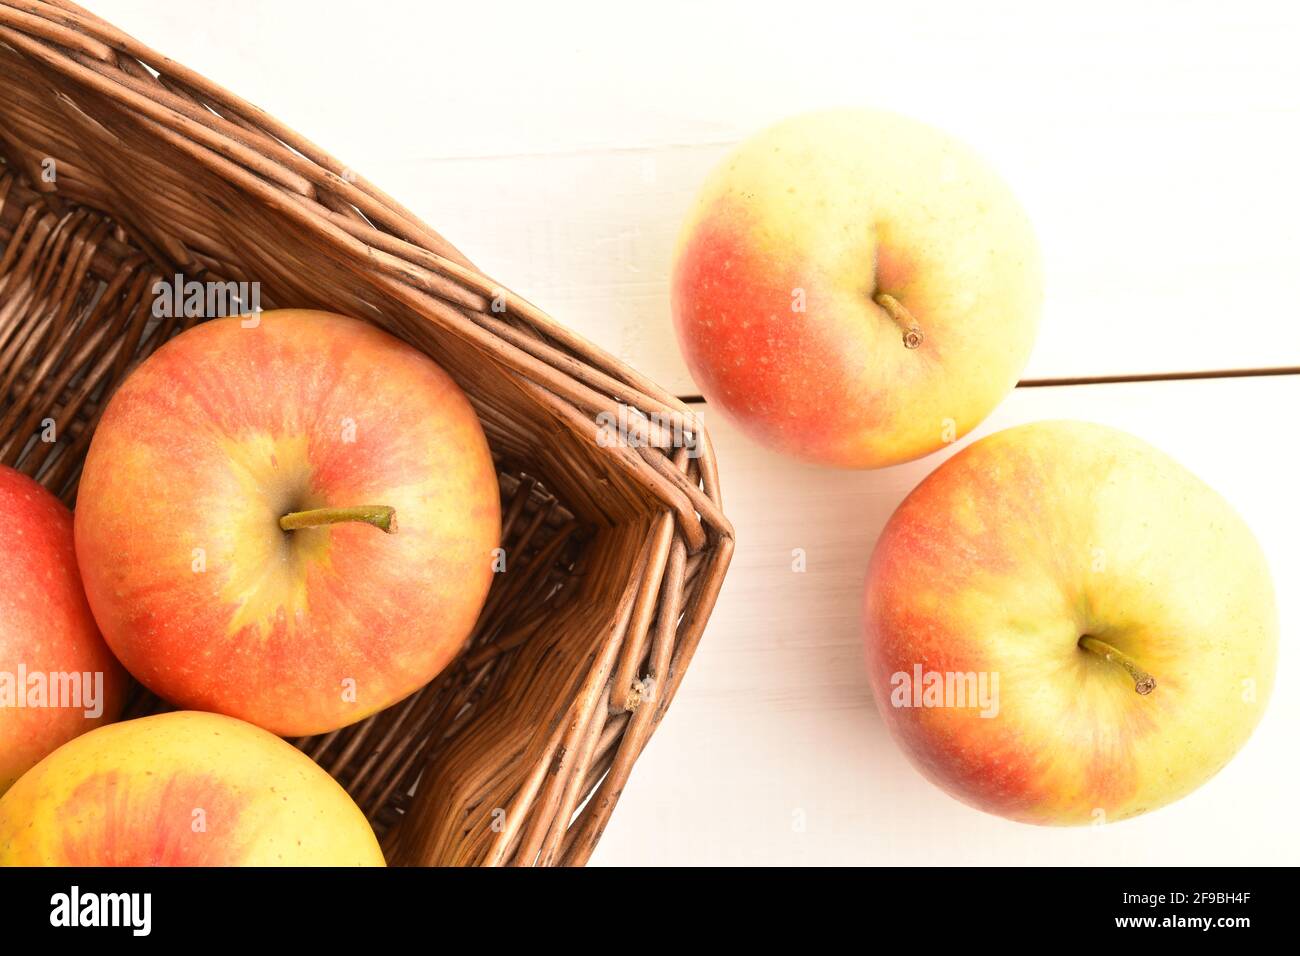 Several ripe organic, juicy, aromatic apples in a wicker basket of vines, close-up, on a painted wooden table. Stock Photo